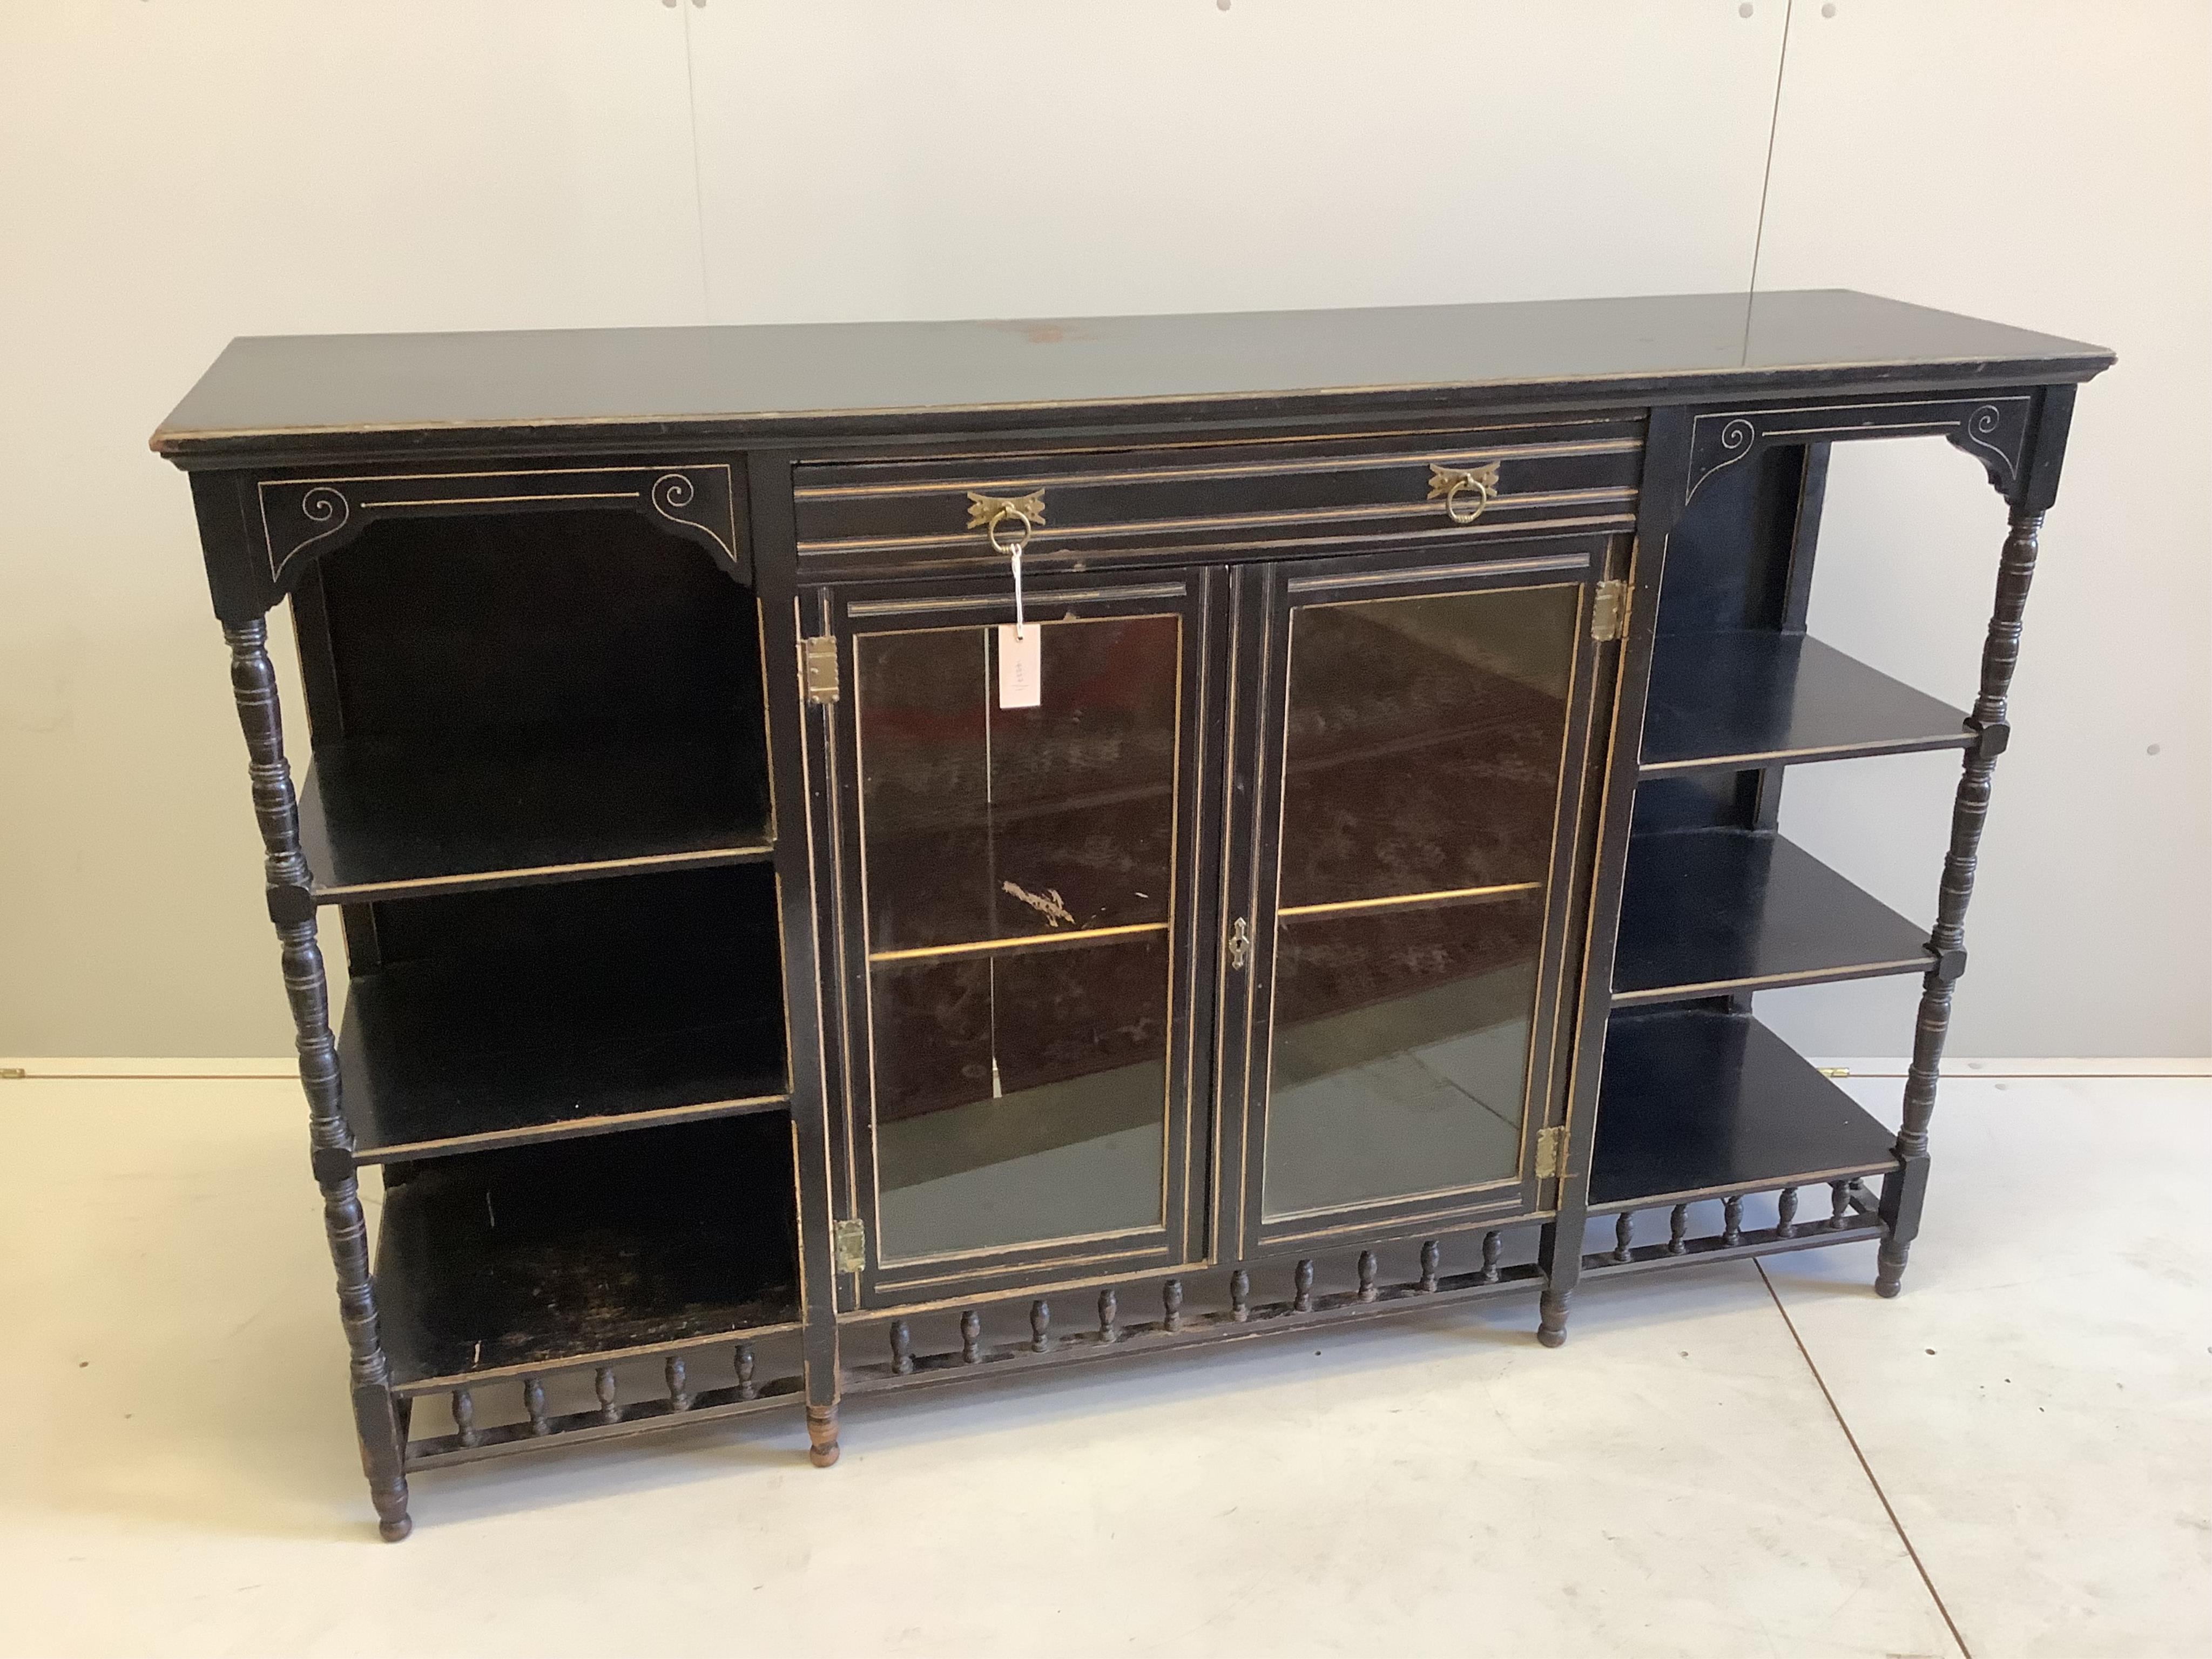 A late Victorian Aesthetic Movement ebonised side cabinet, width 167cm, depth 43cm, height 105cm. Condition - poor